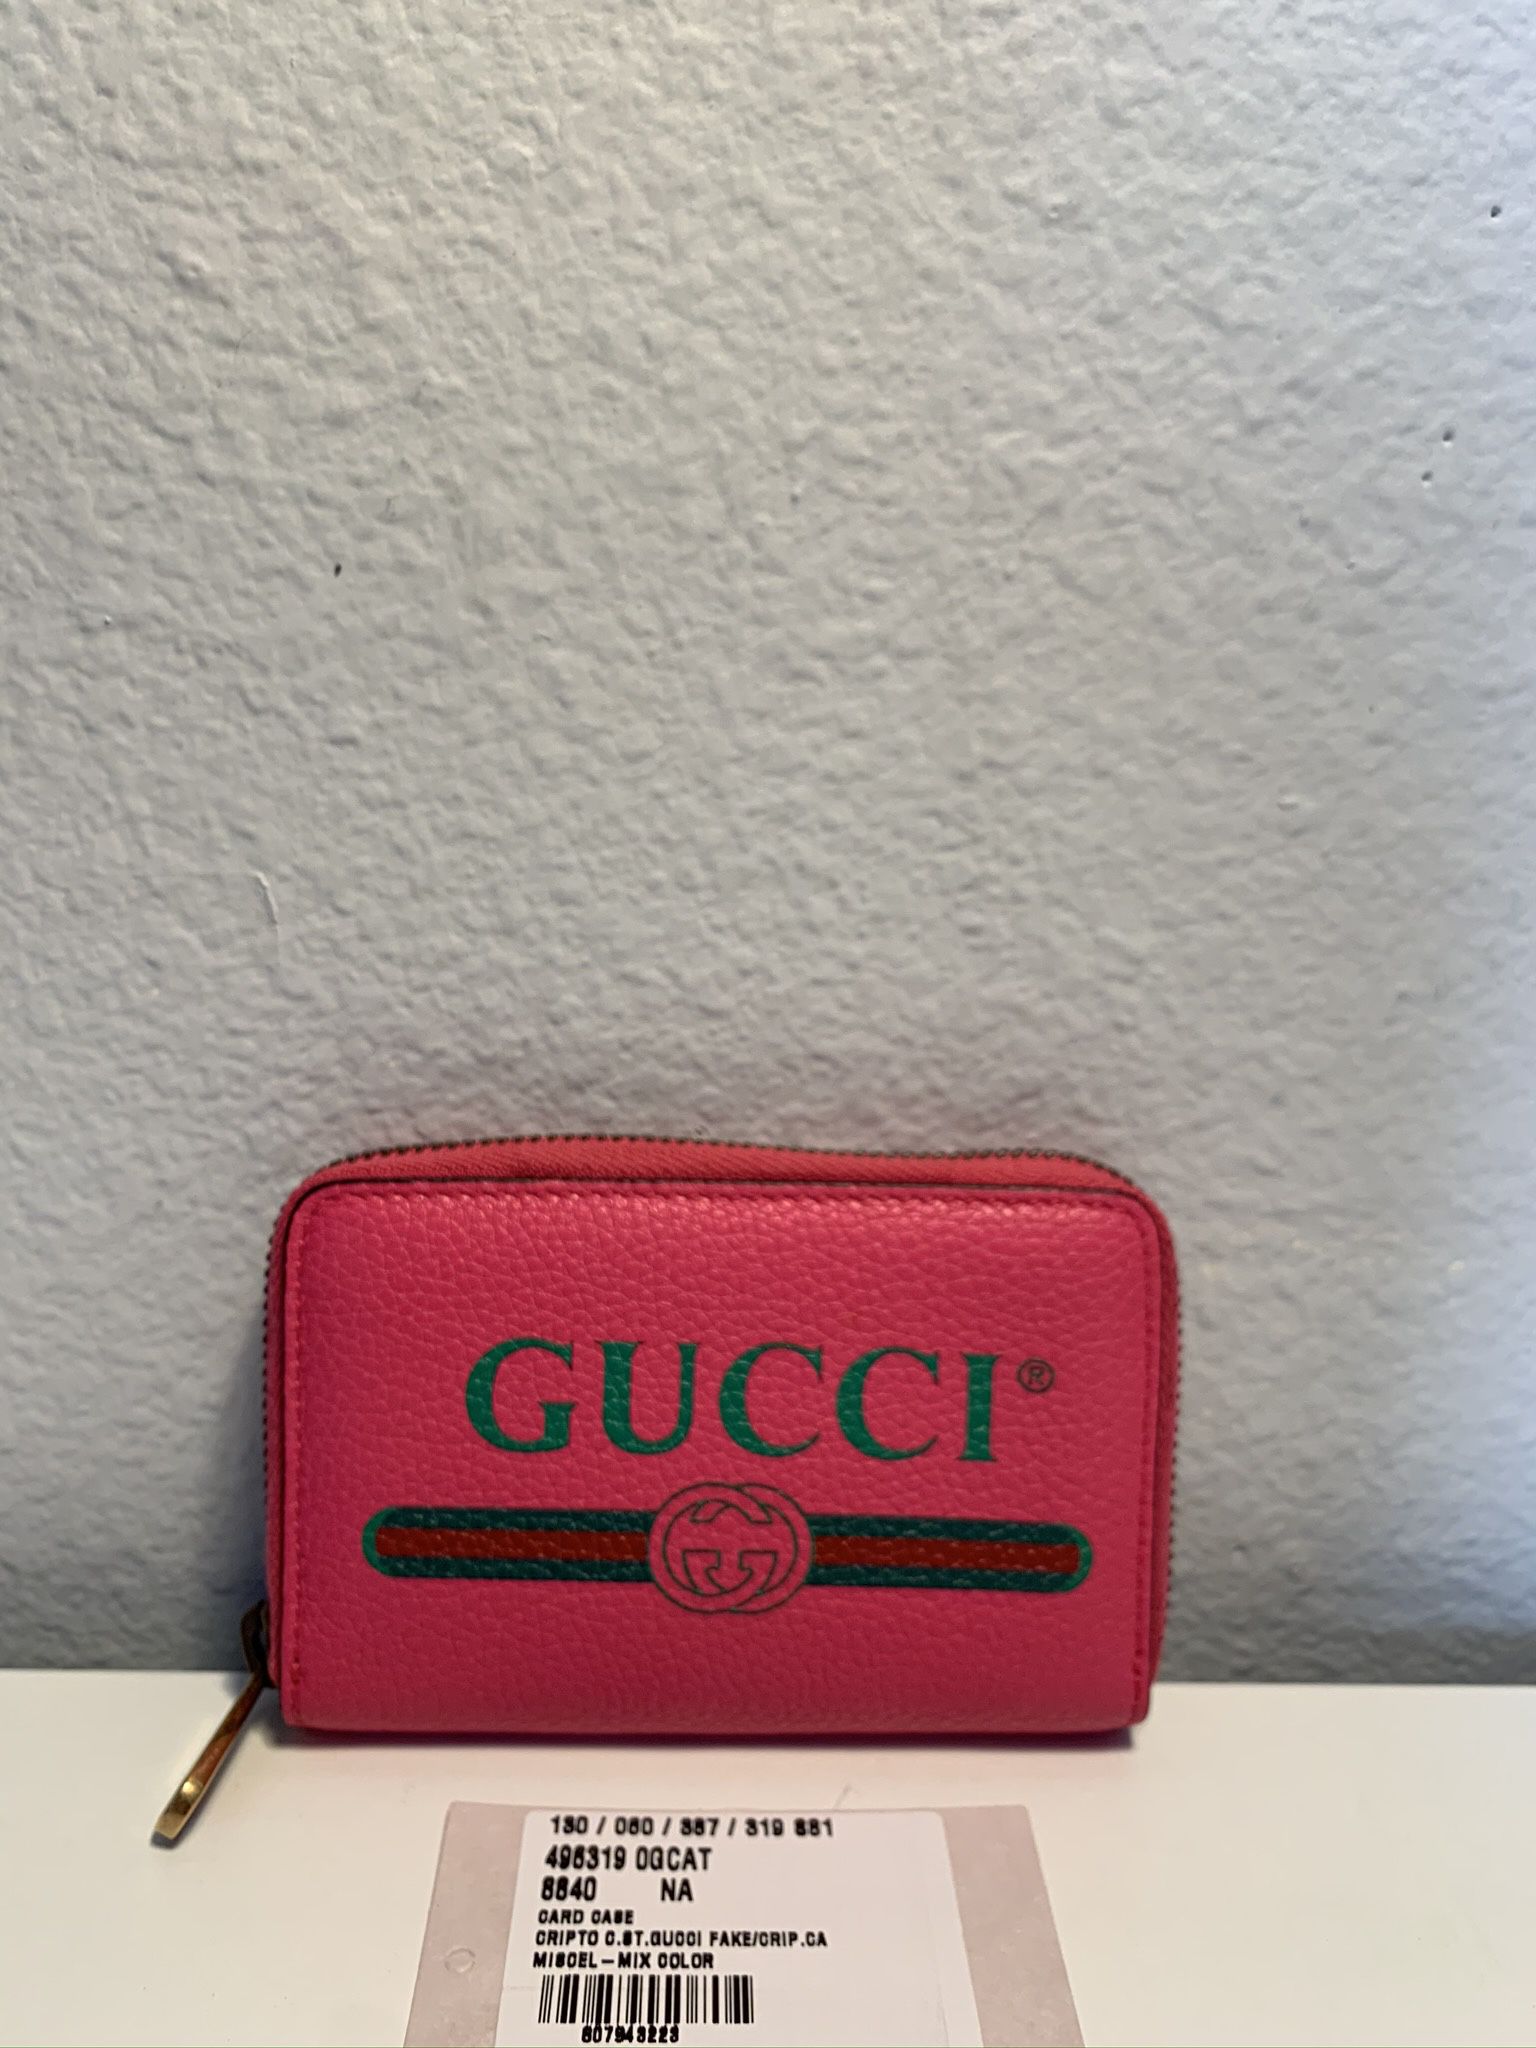 GUCCI Logo Pink Leather Coin Wallet $698